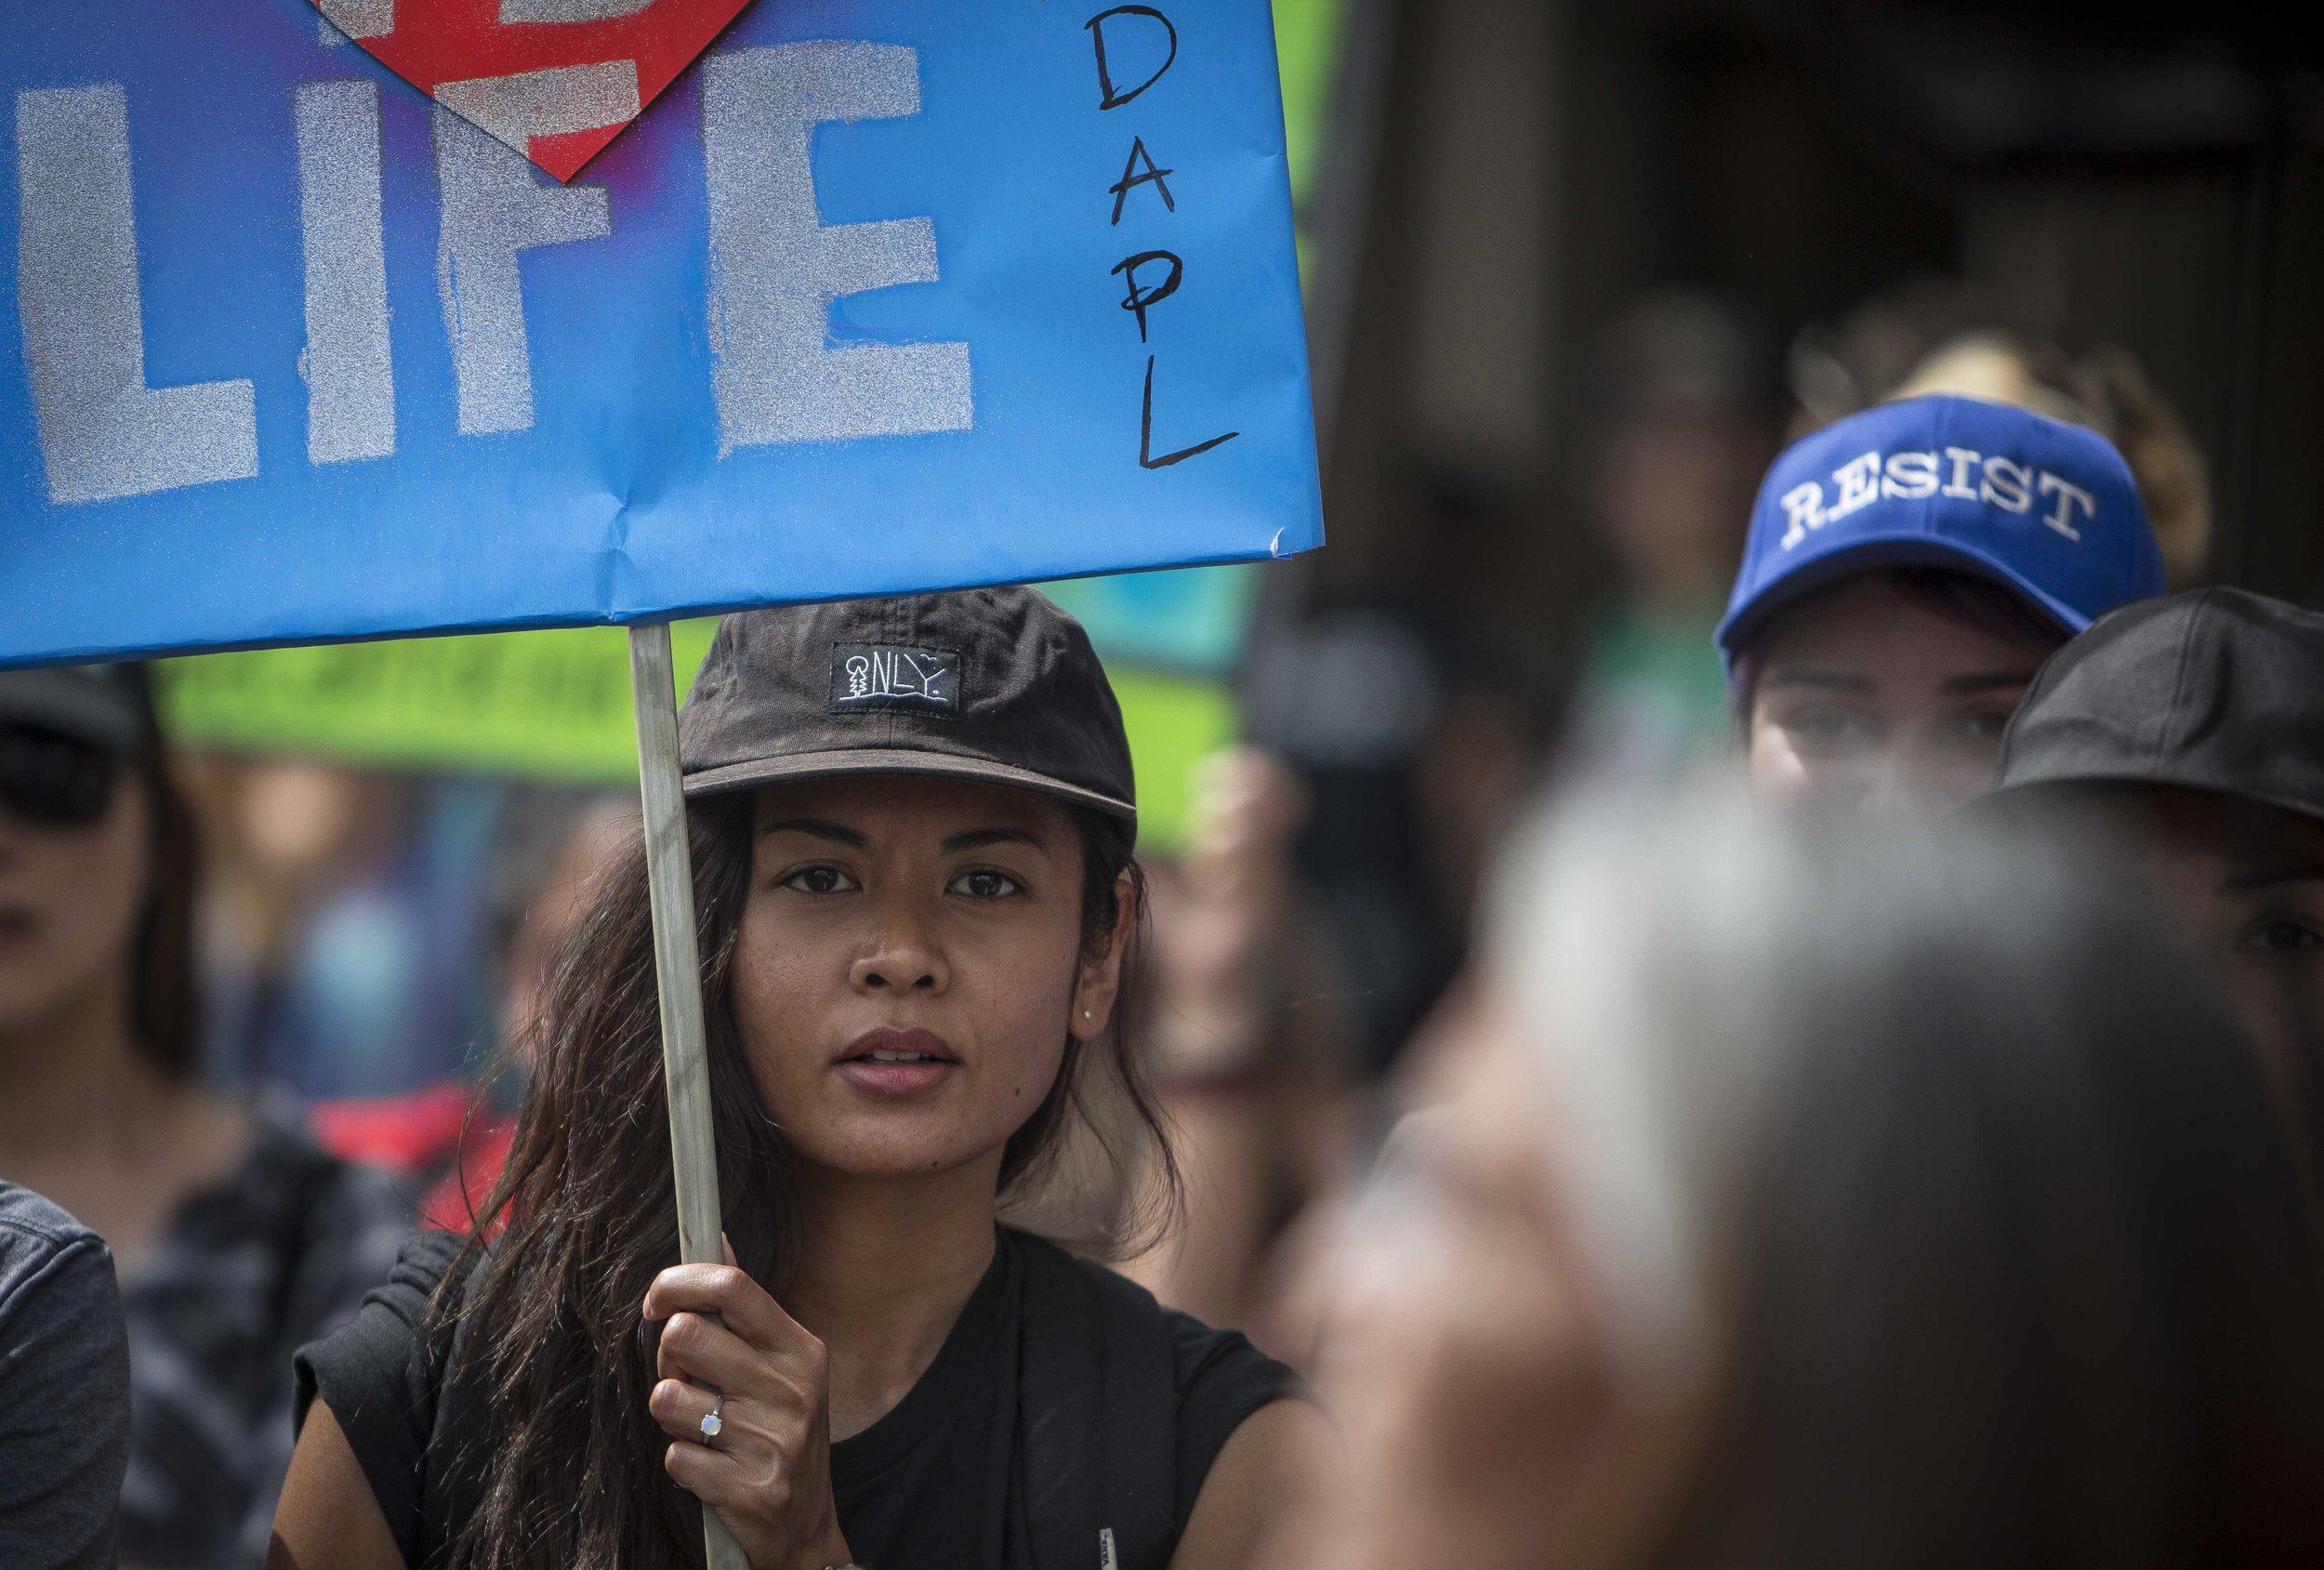  An protester holdind a sign about the Dakota Access  Pipeline prepaing to march from Pershing Square to City Hall in Downtown Los Angles, Calif., on Friday March 10, 2017.  Photo by: Daniel/Corsair Staff 